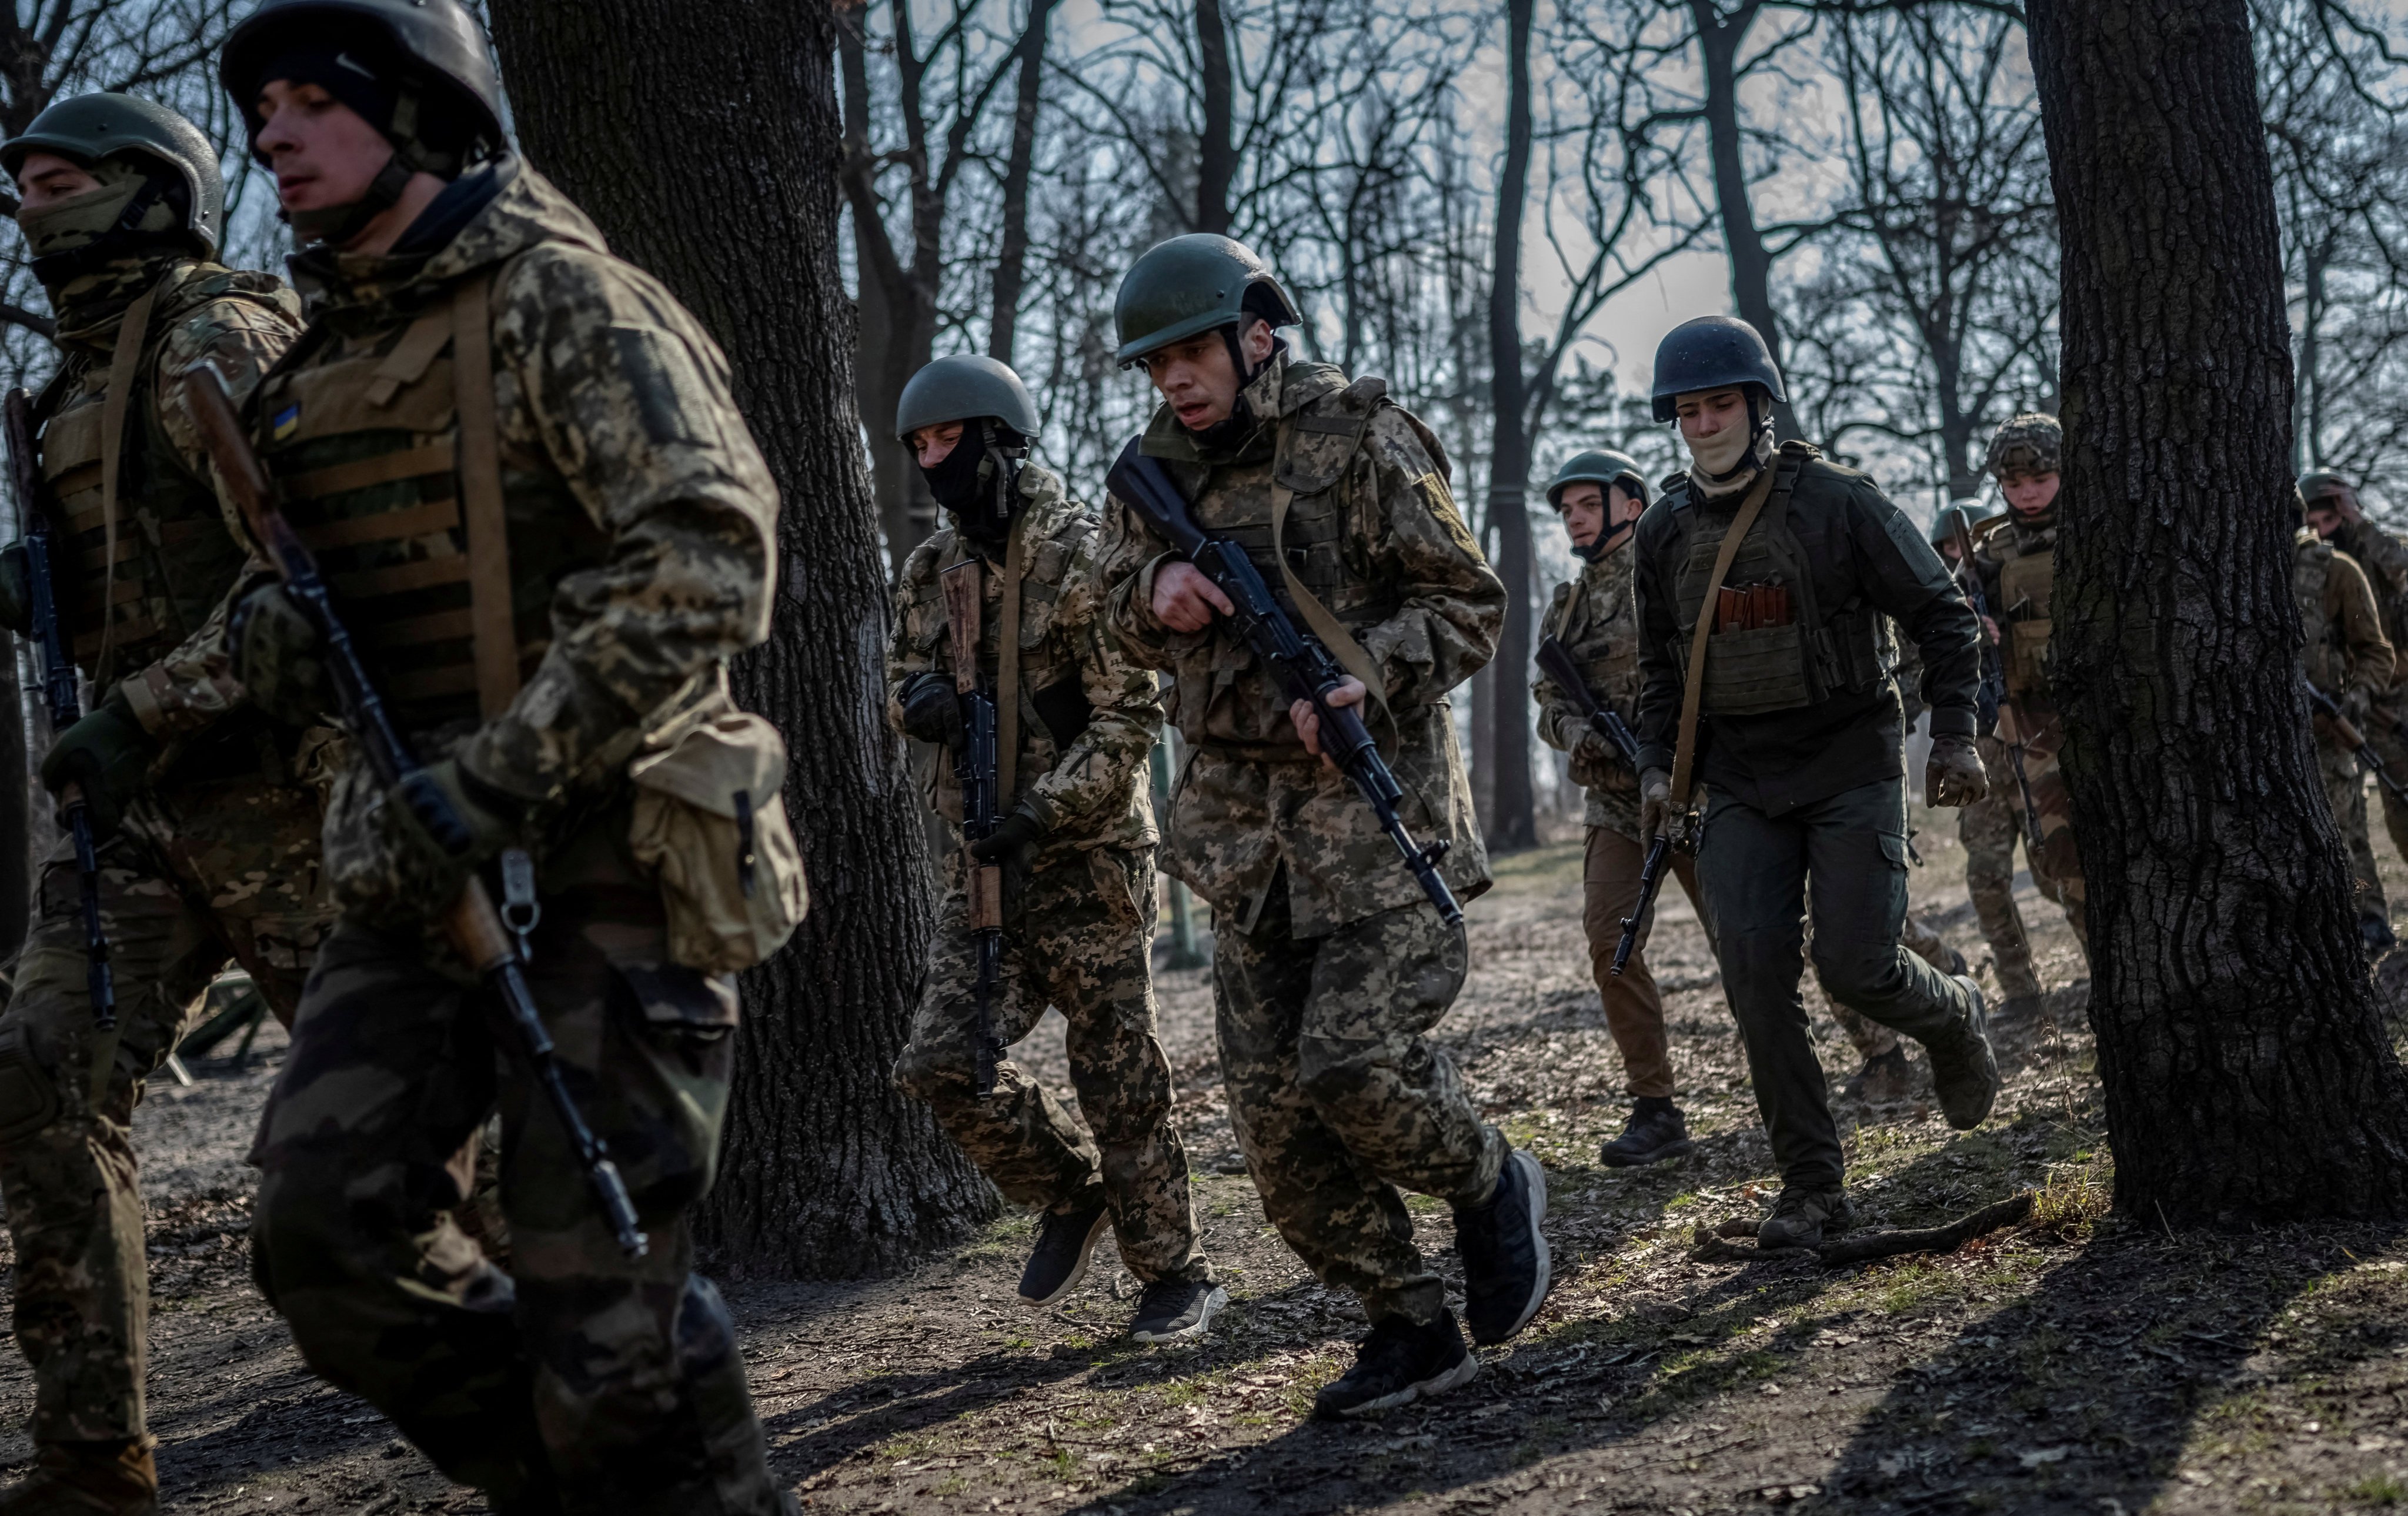 Volunteers who aspire to join the 3rd Separate Assault Brigade of the Ukrainian Armed Forces take part in basic training in the Kyiv region in March. Photo: Reuters